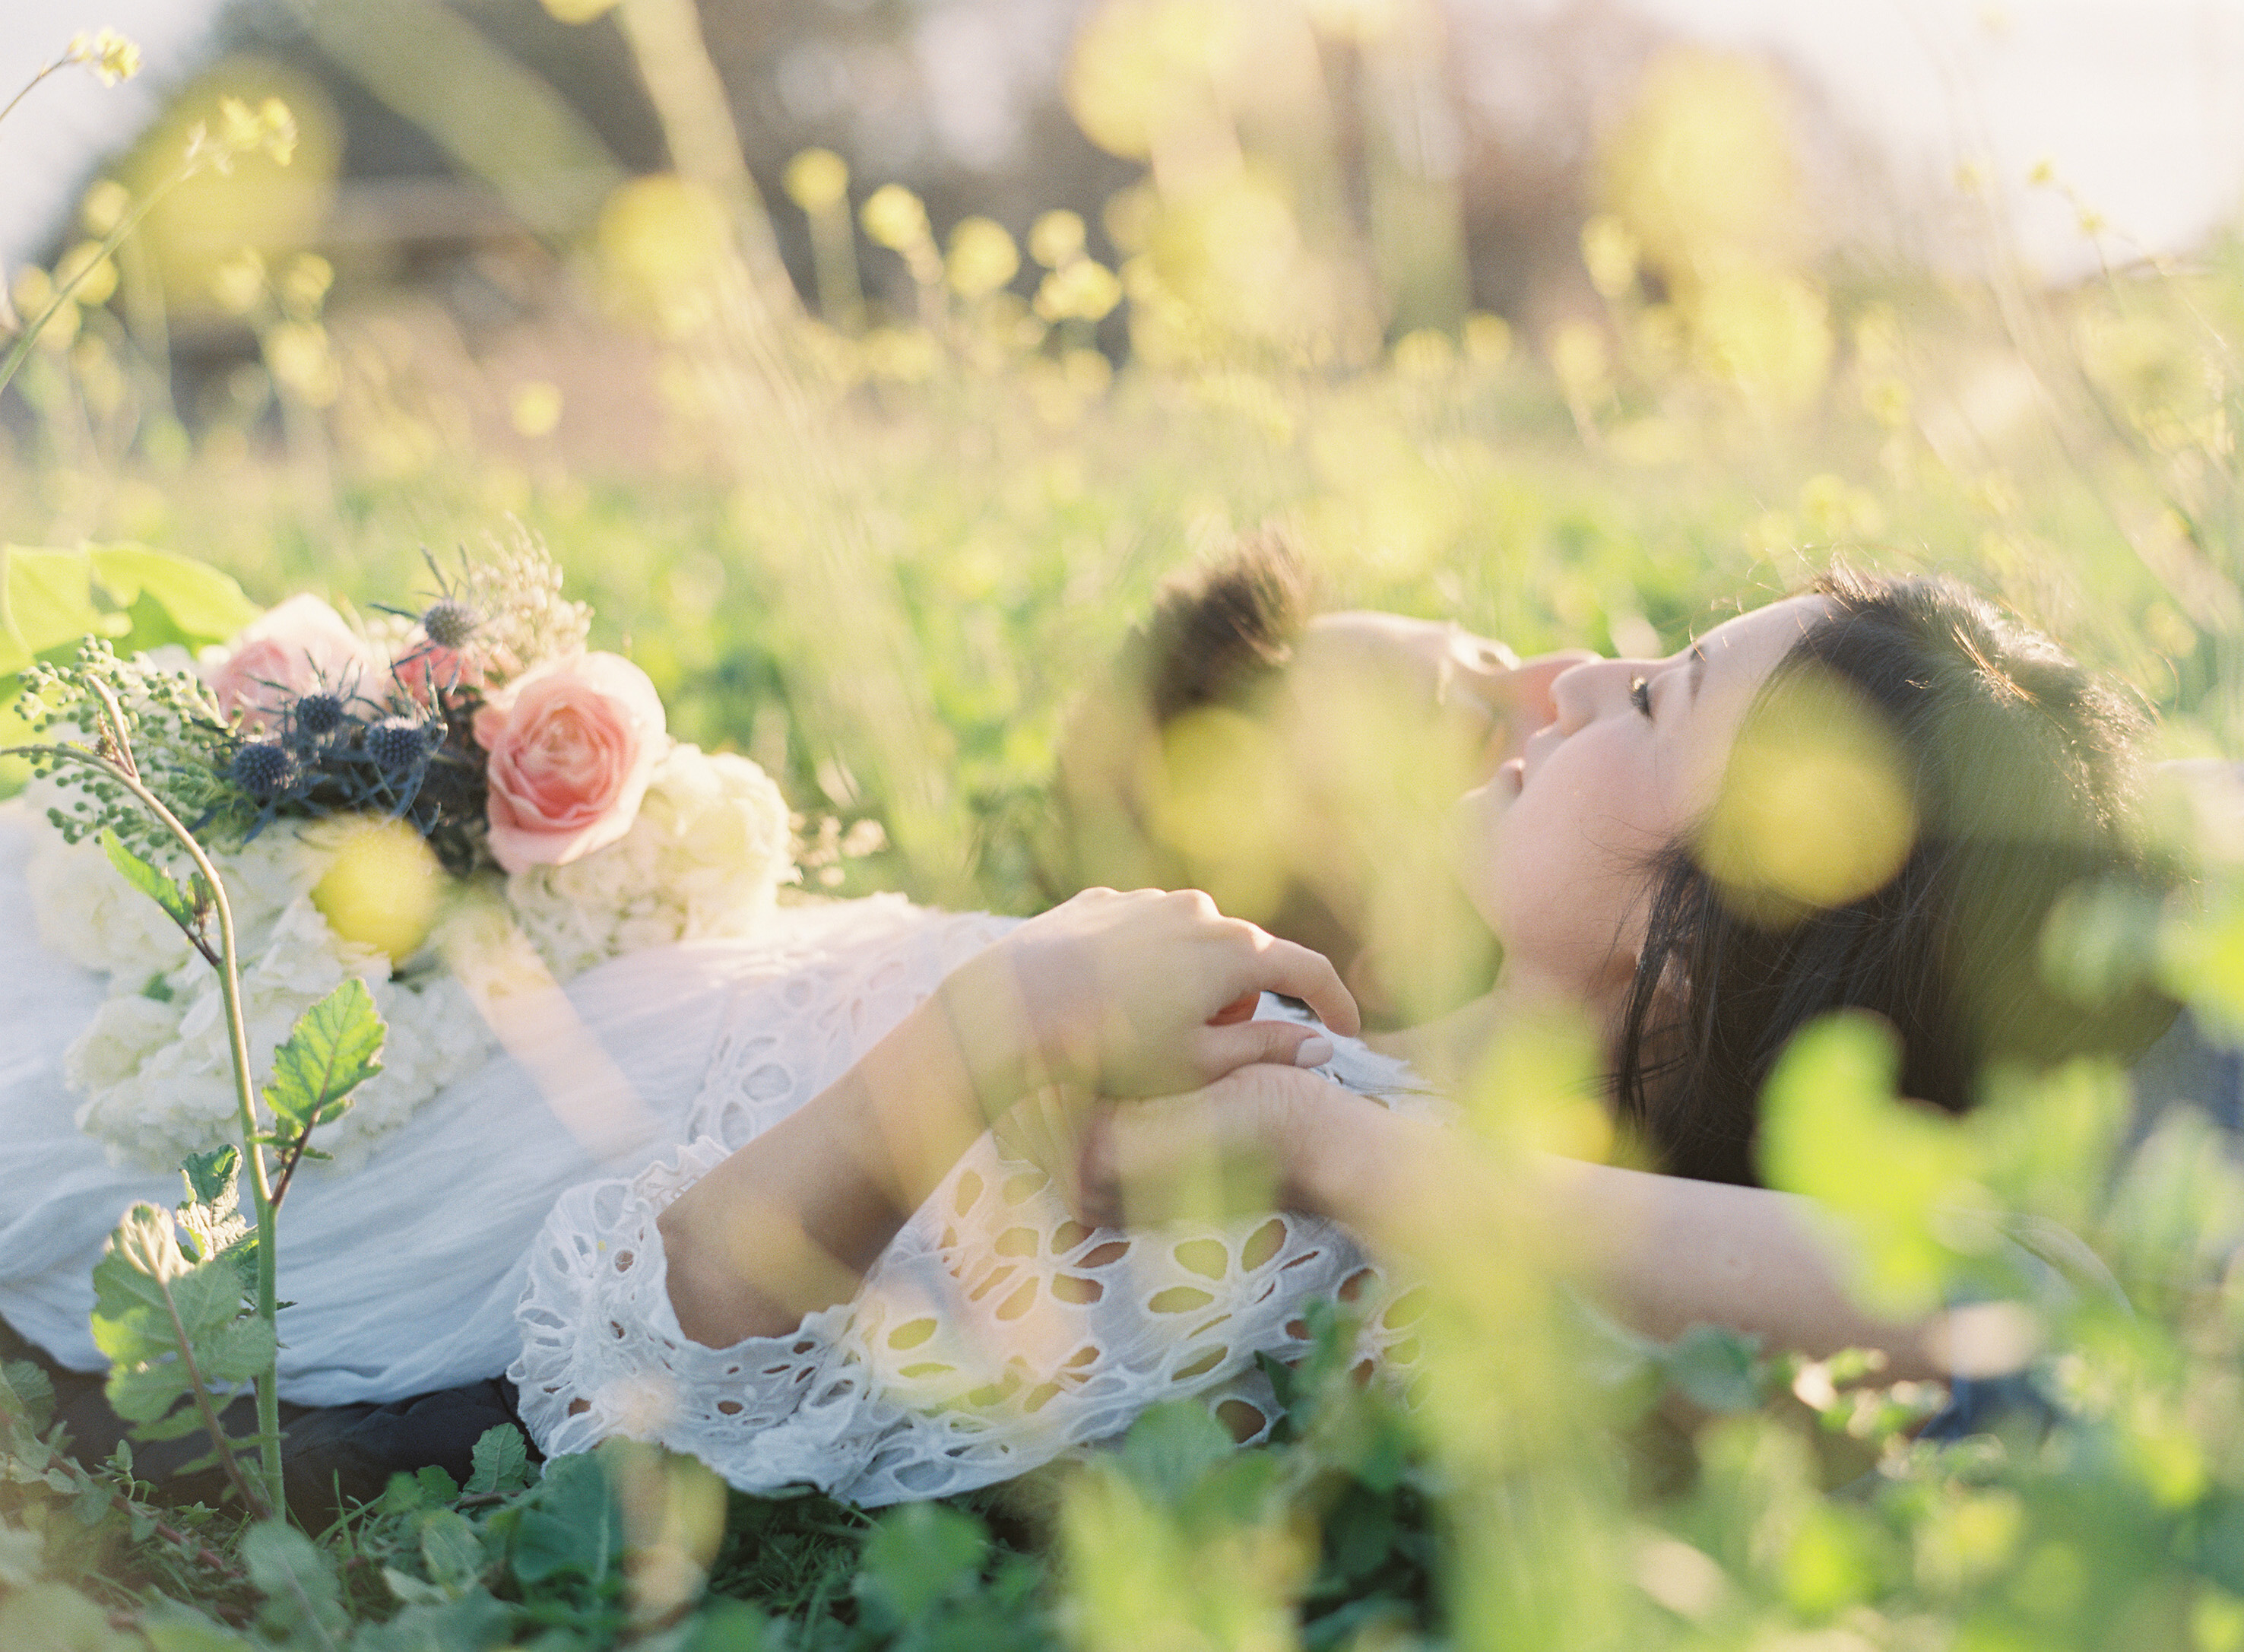 Couple laying on grass together with yellow flowers blurry in front of them